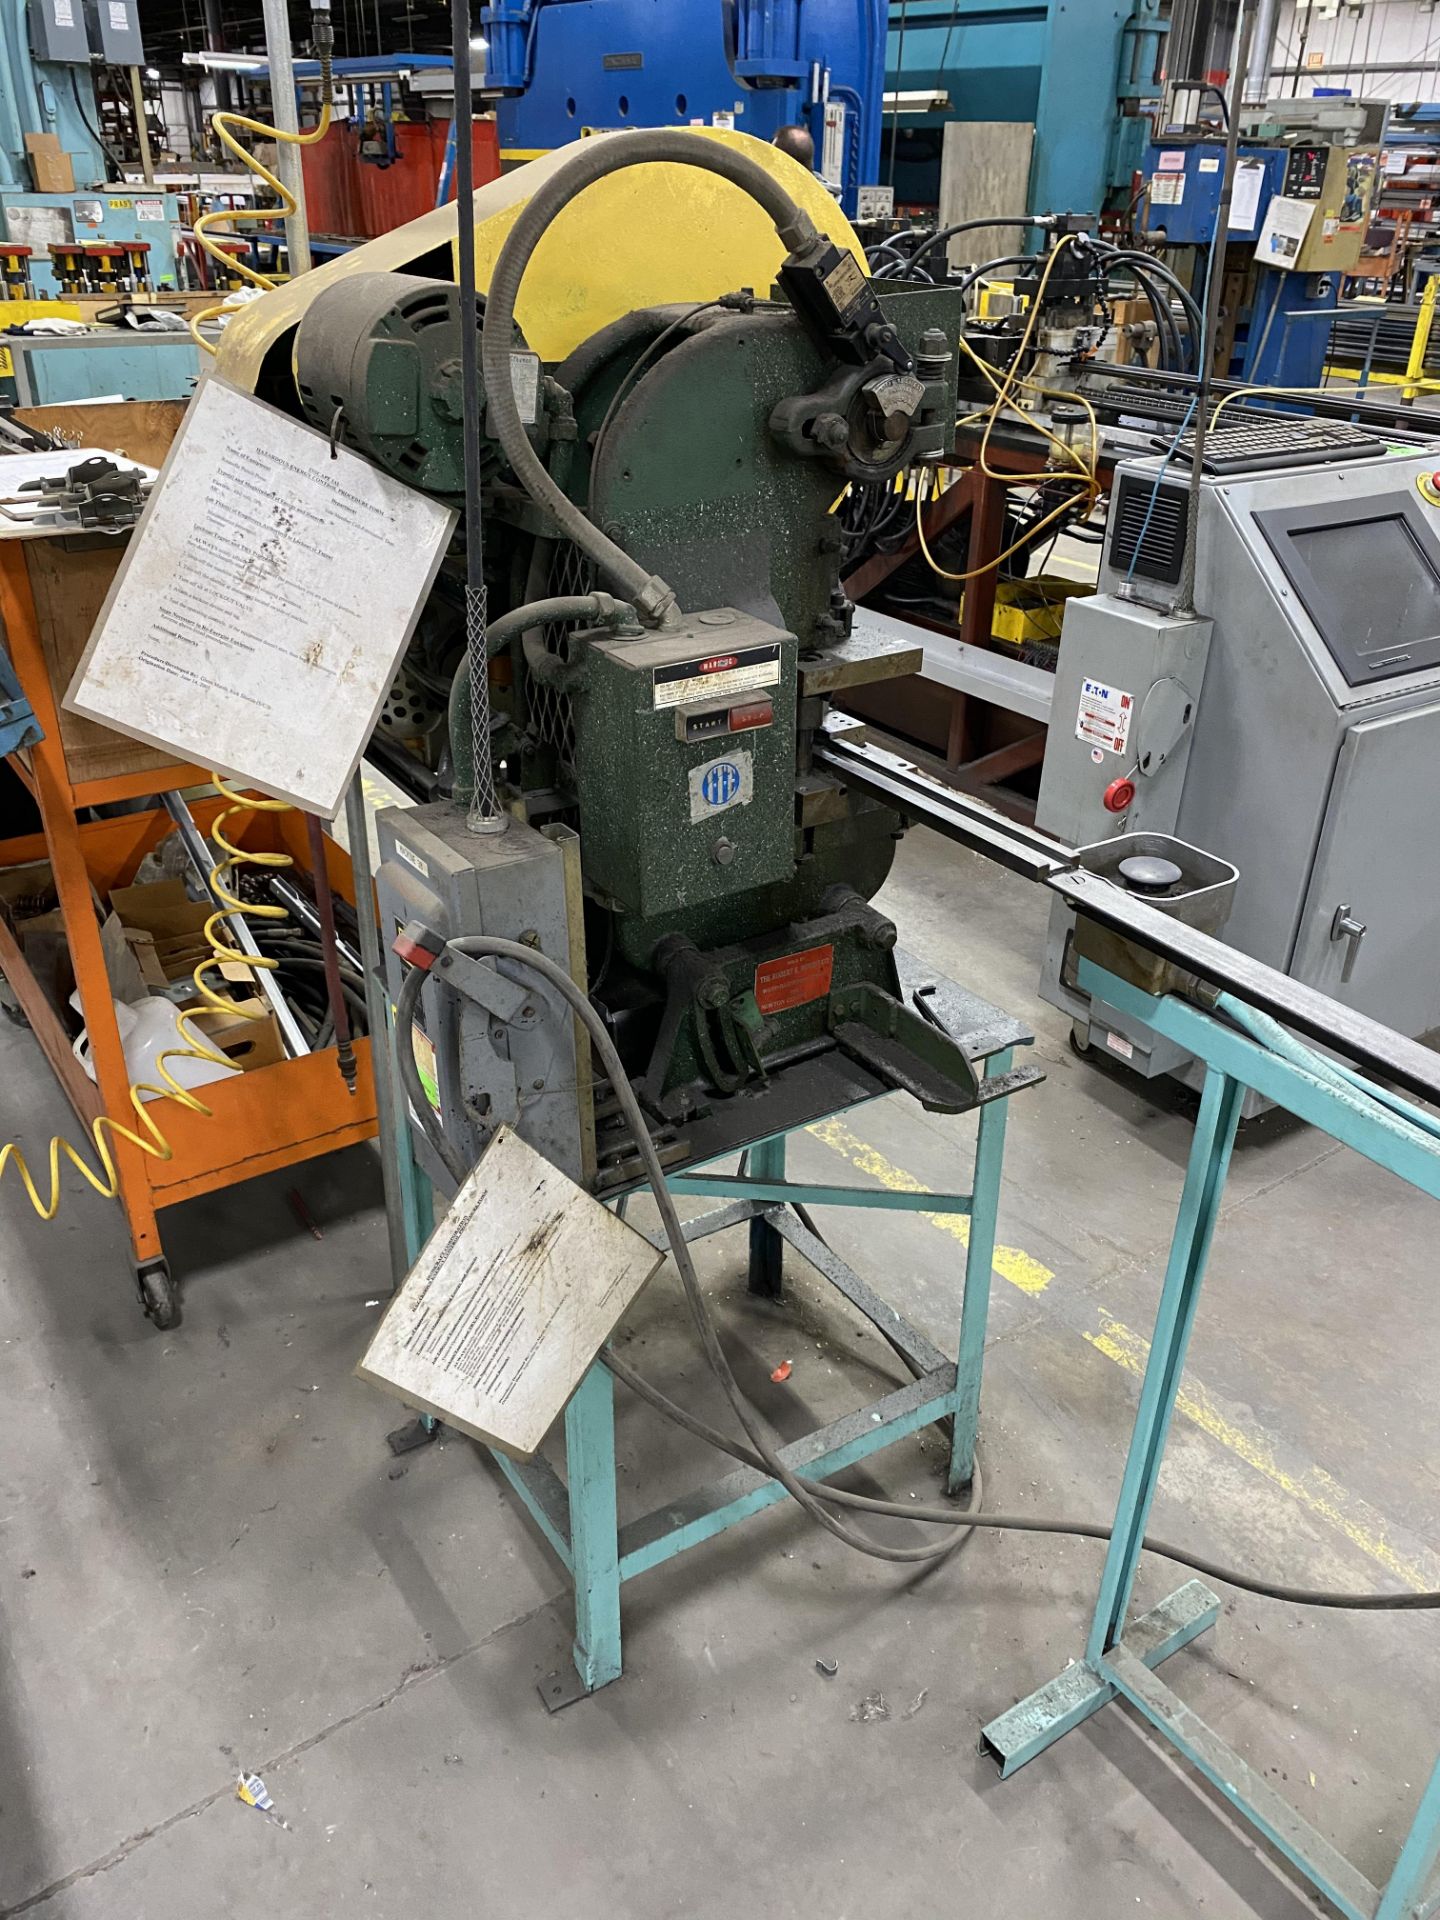 ROUSSELLE 5-Ton Mechanical OBI Punch Press mod.0A 5-Ton Post, s/n: 23770 - Image 4 of 5